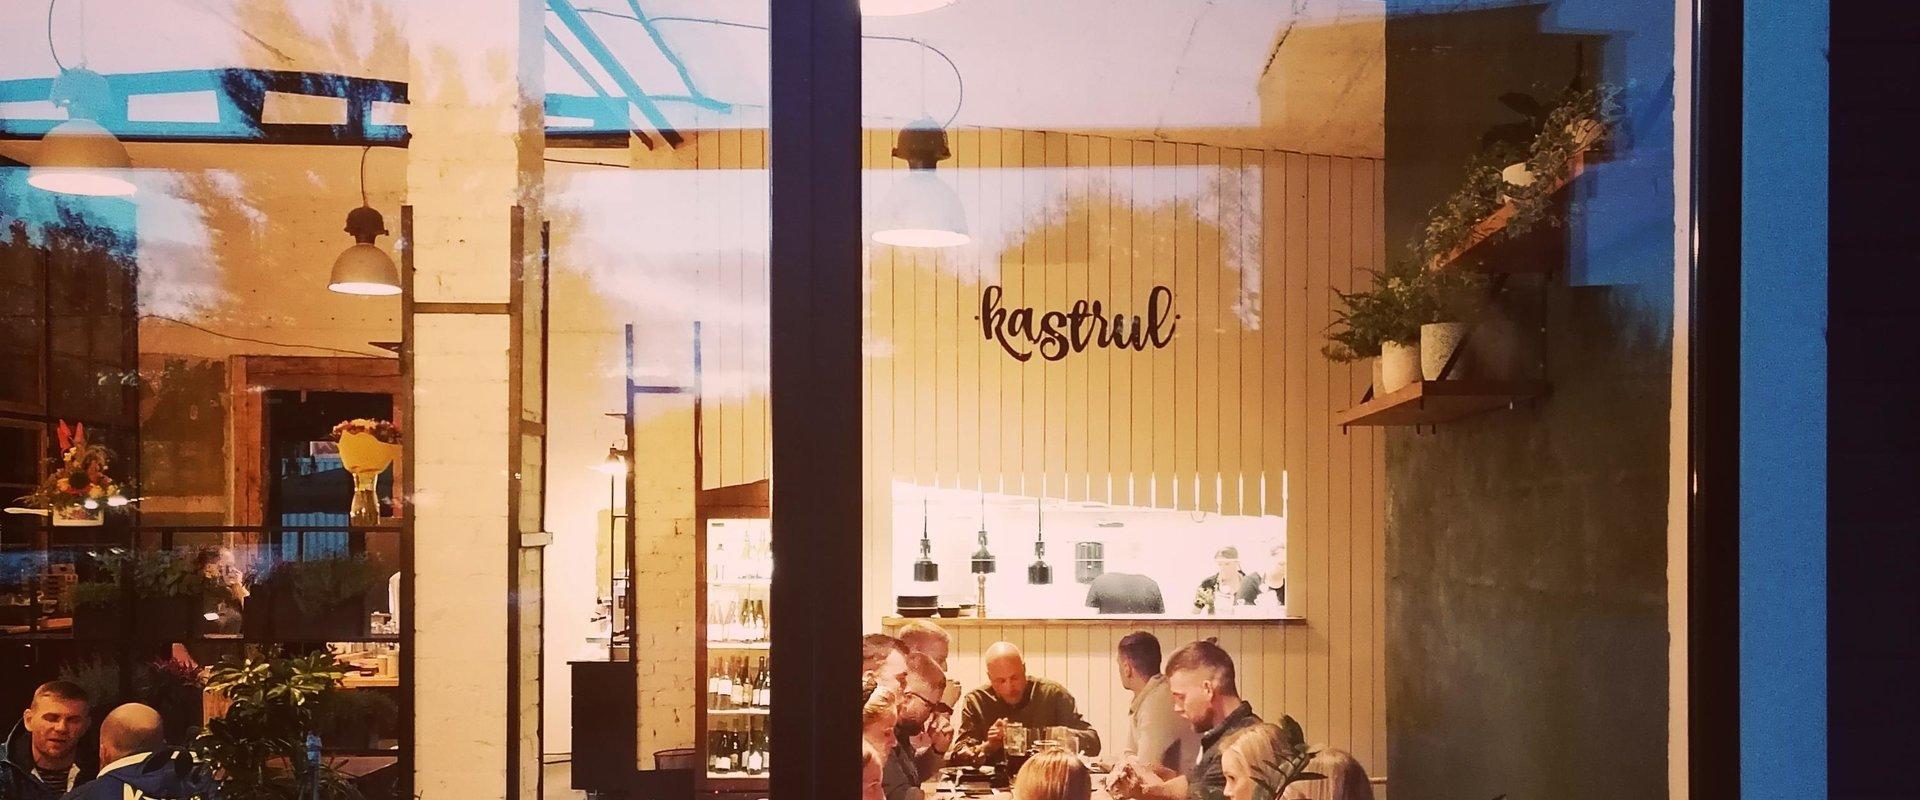 Kastrul is a café located by the River Pärnu, which offers local food influenced by the Asian and Mediterranean cuisine. Local raw materials and ideas